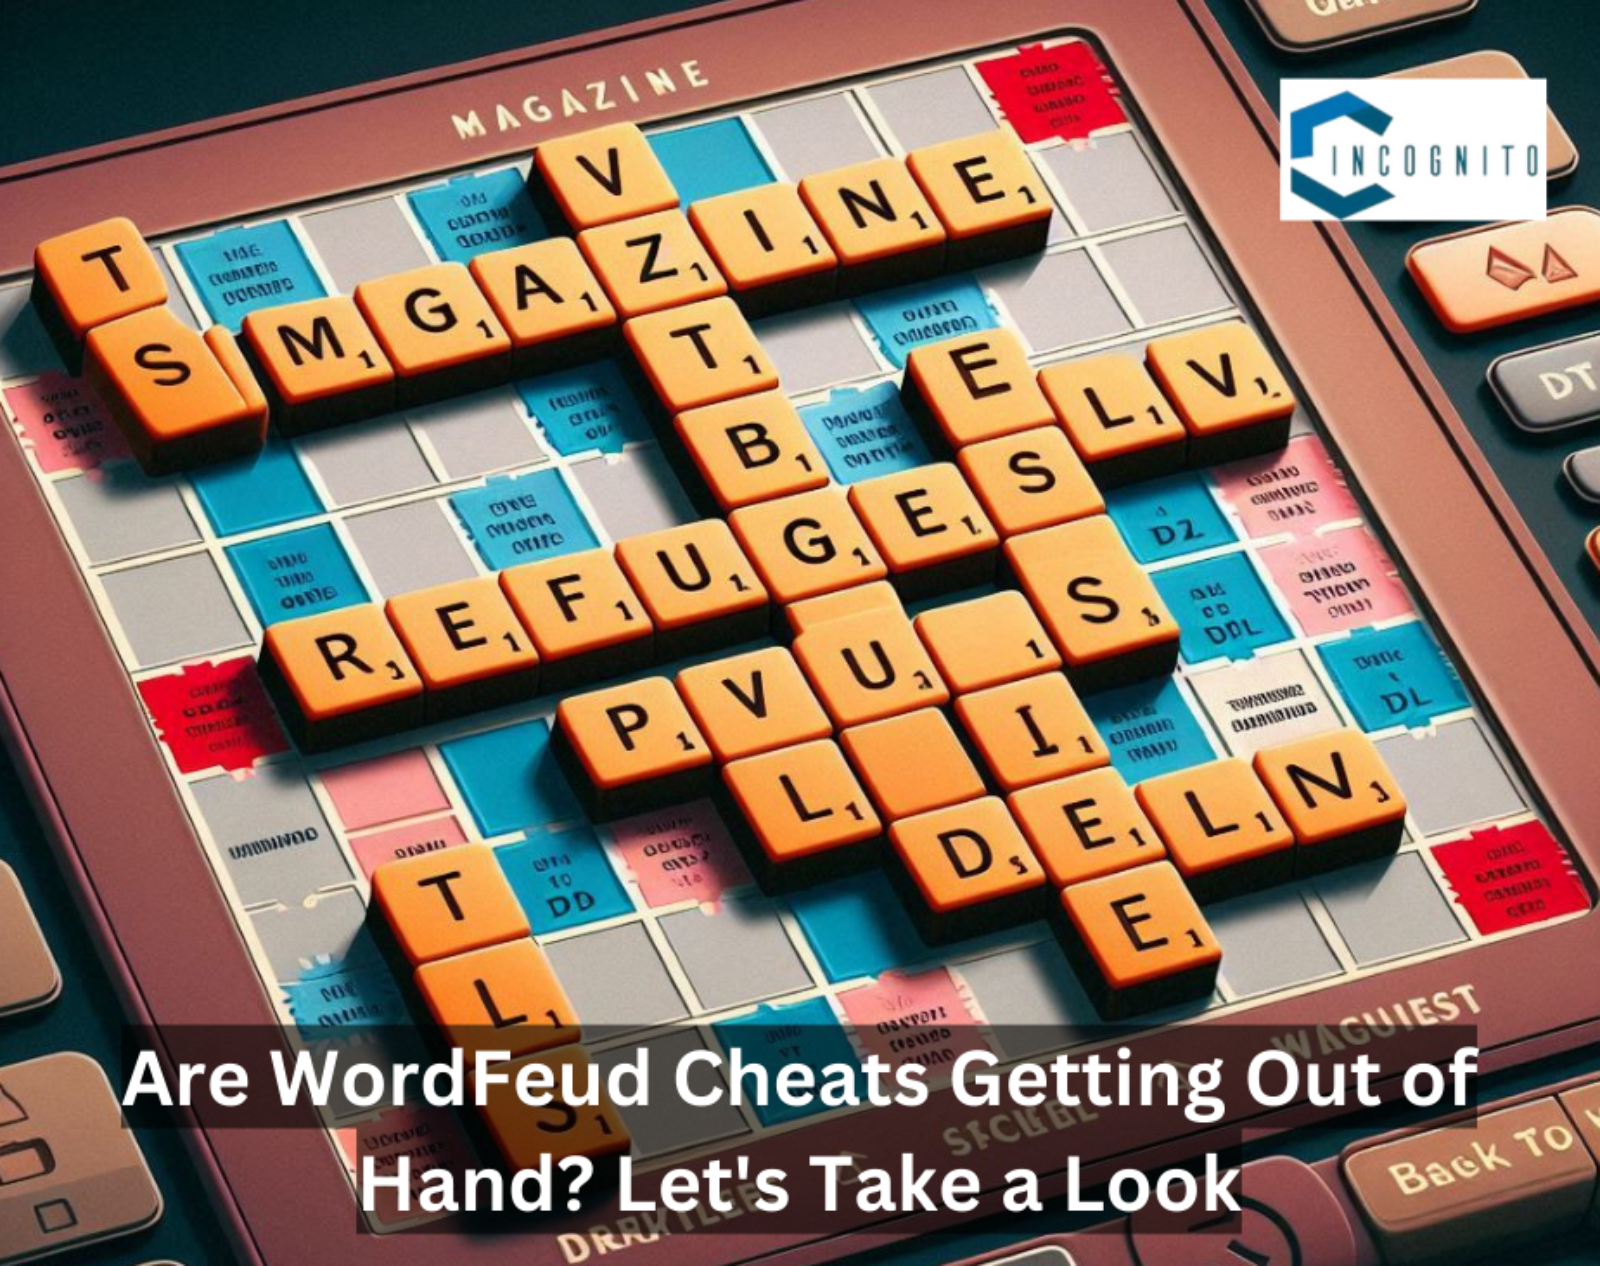 WordFeud Cheats Getting Out of Hand